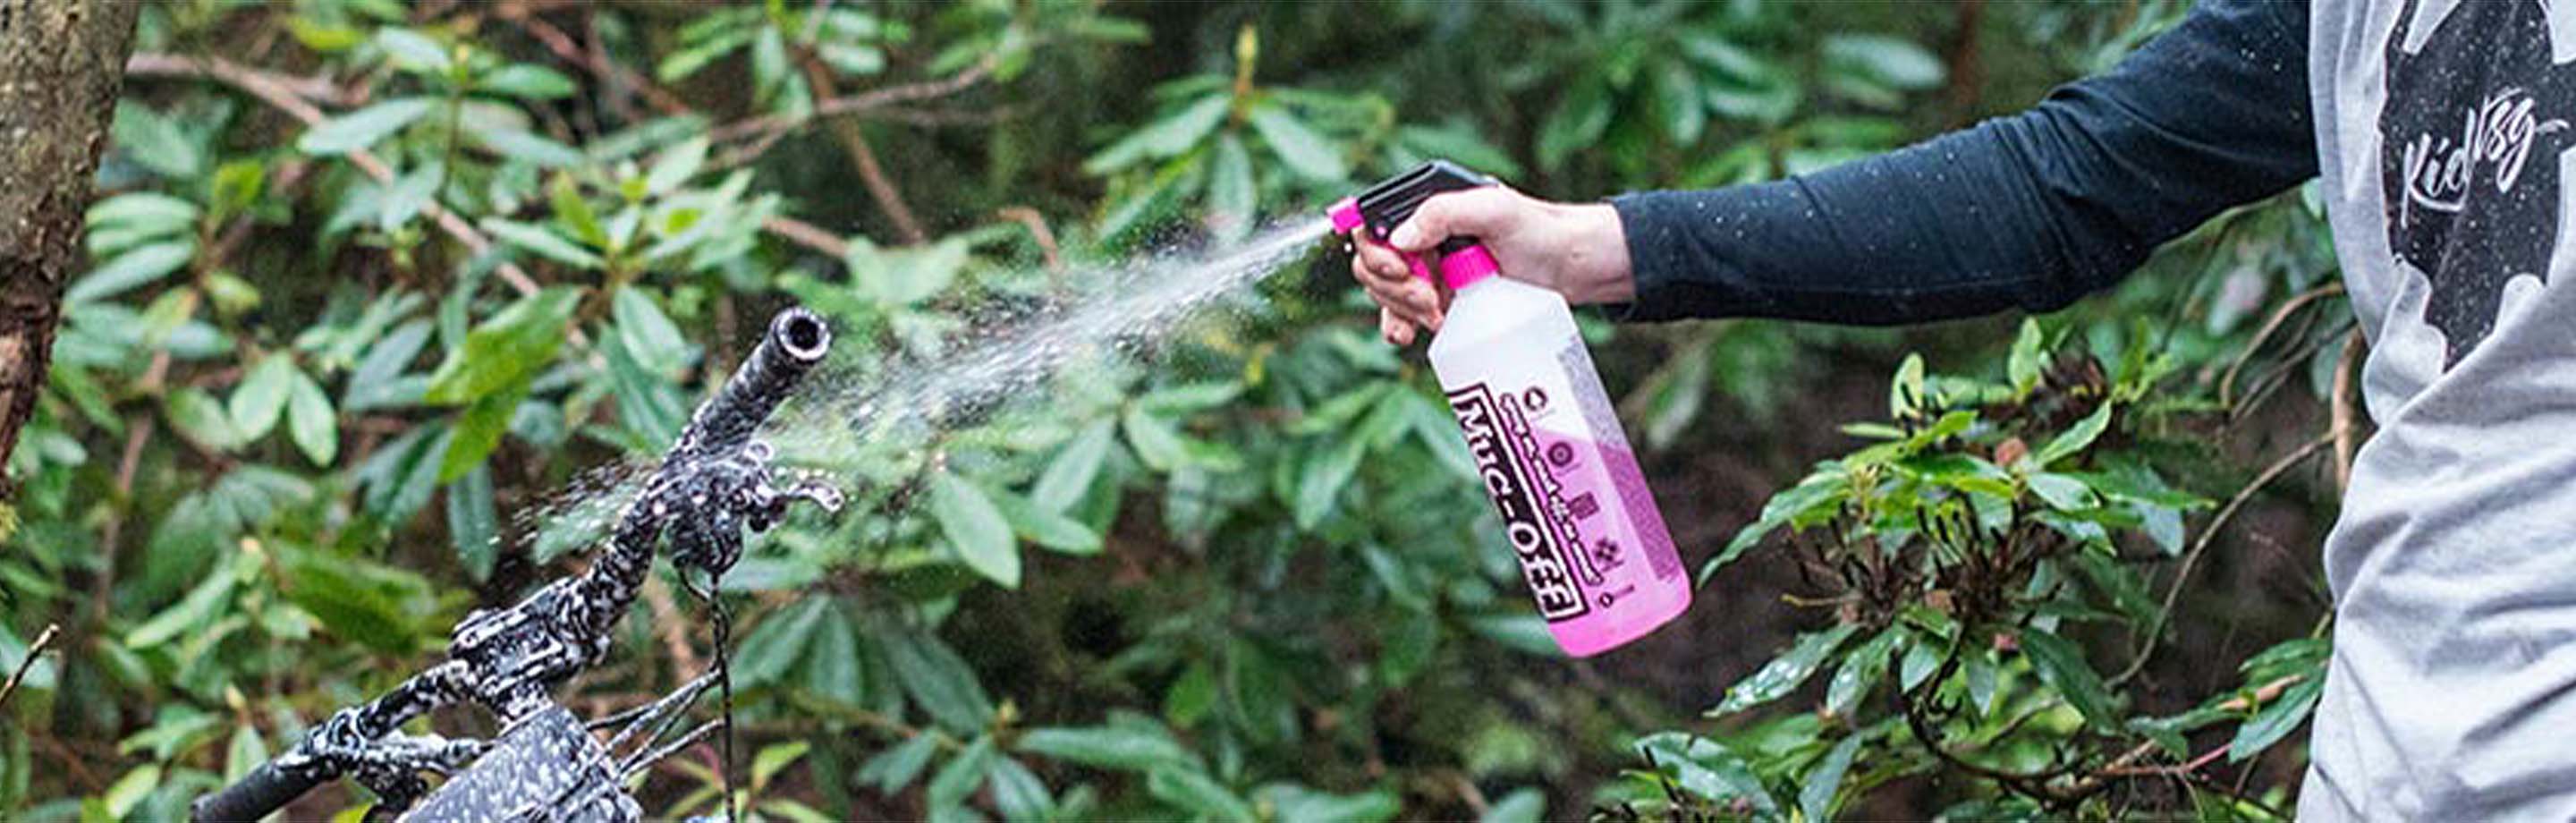 Muc-off Bike Cleaner & Care Products - Bicycle Care Made Easy